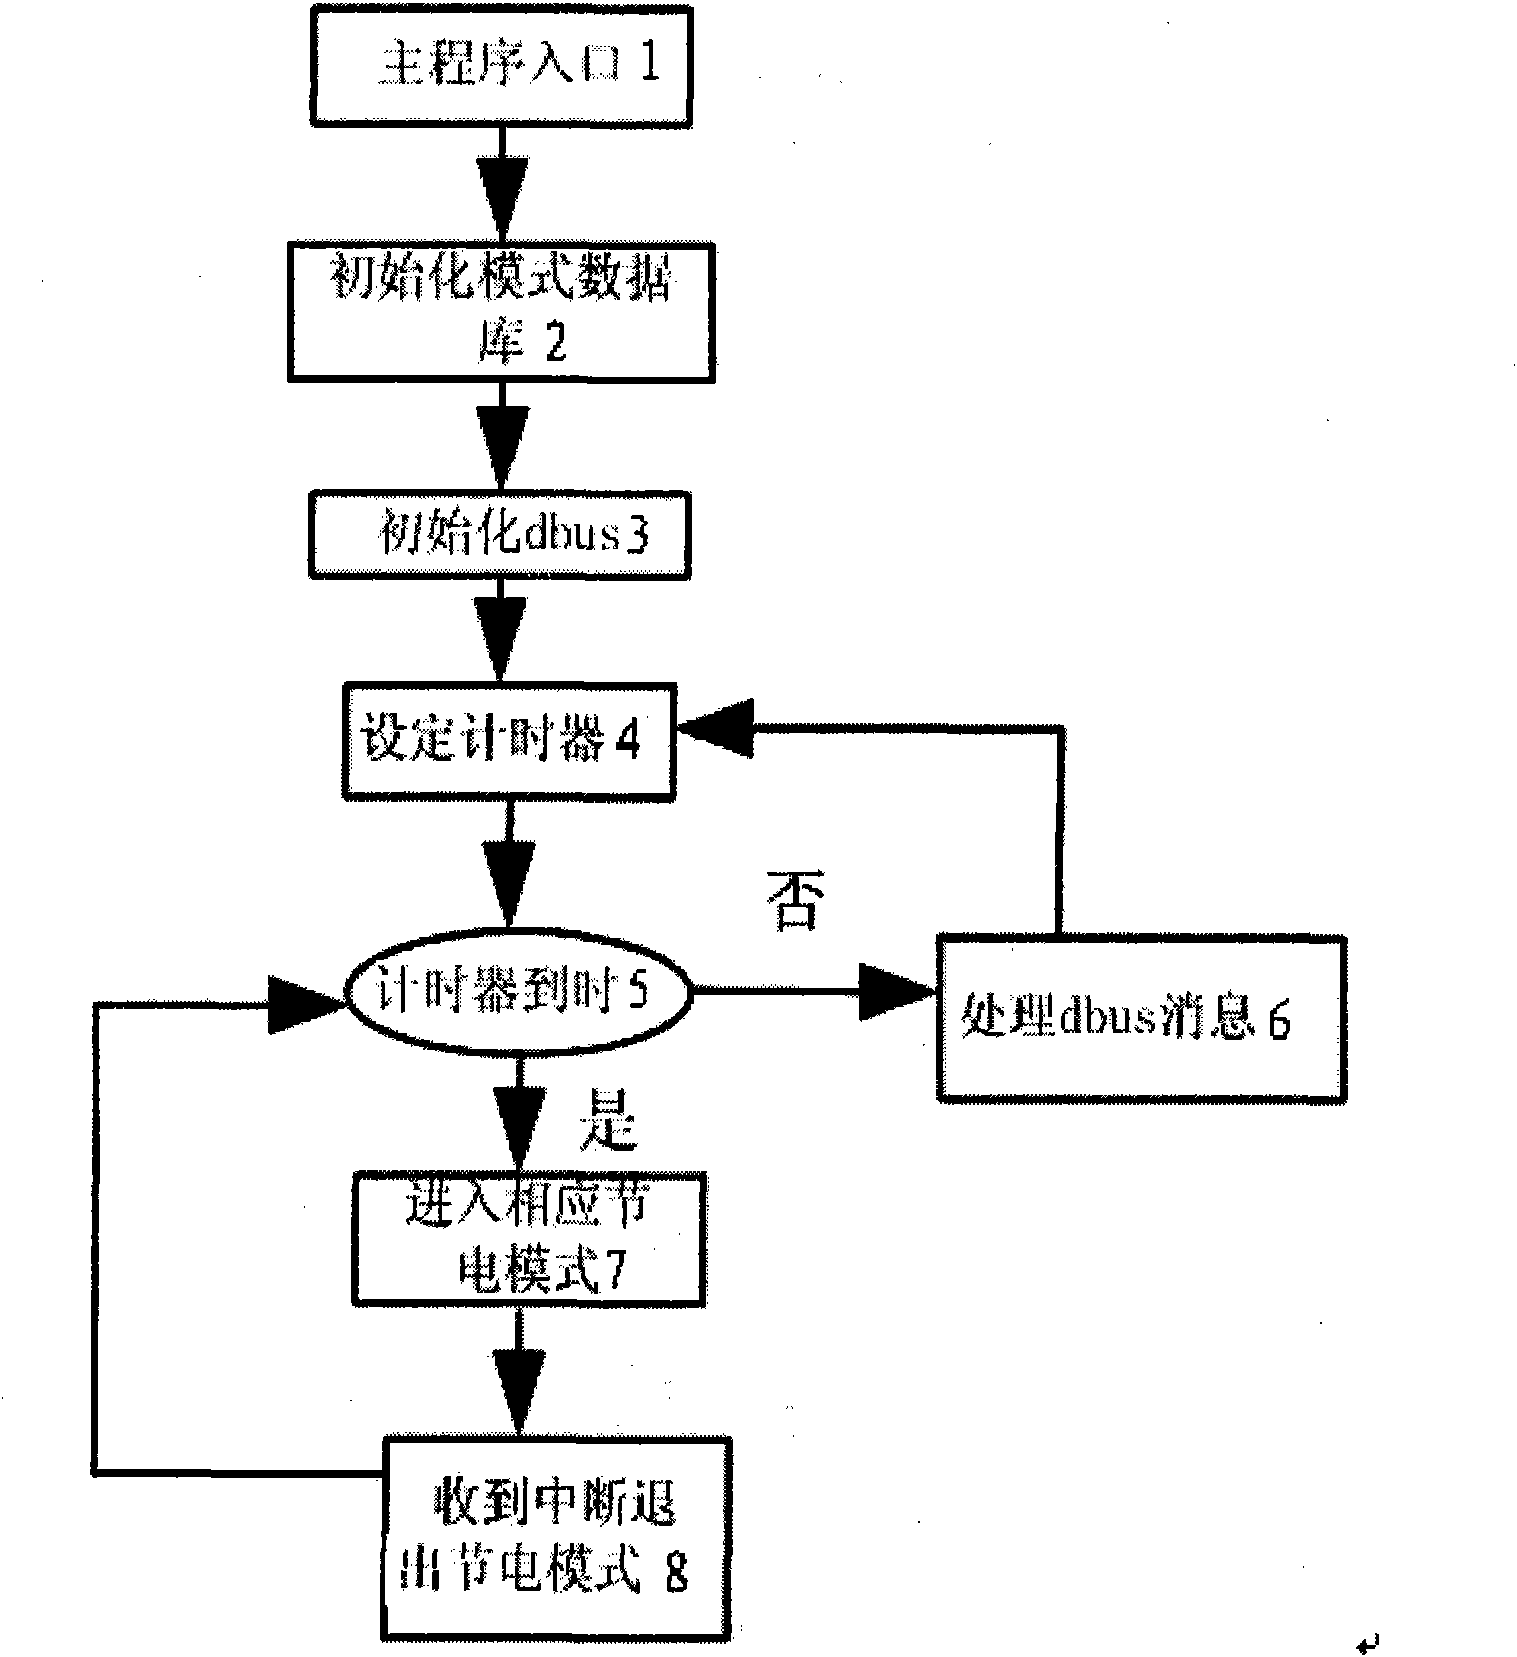 Power management device based on linux system and management method thereof